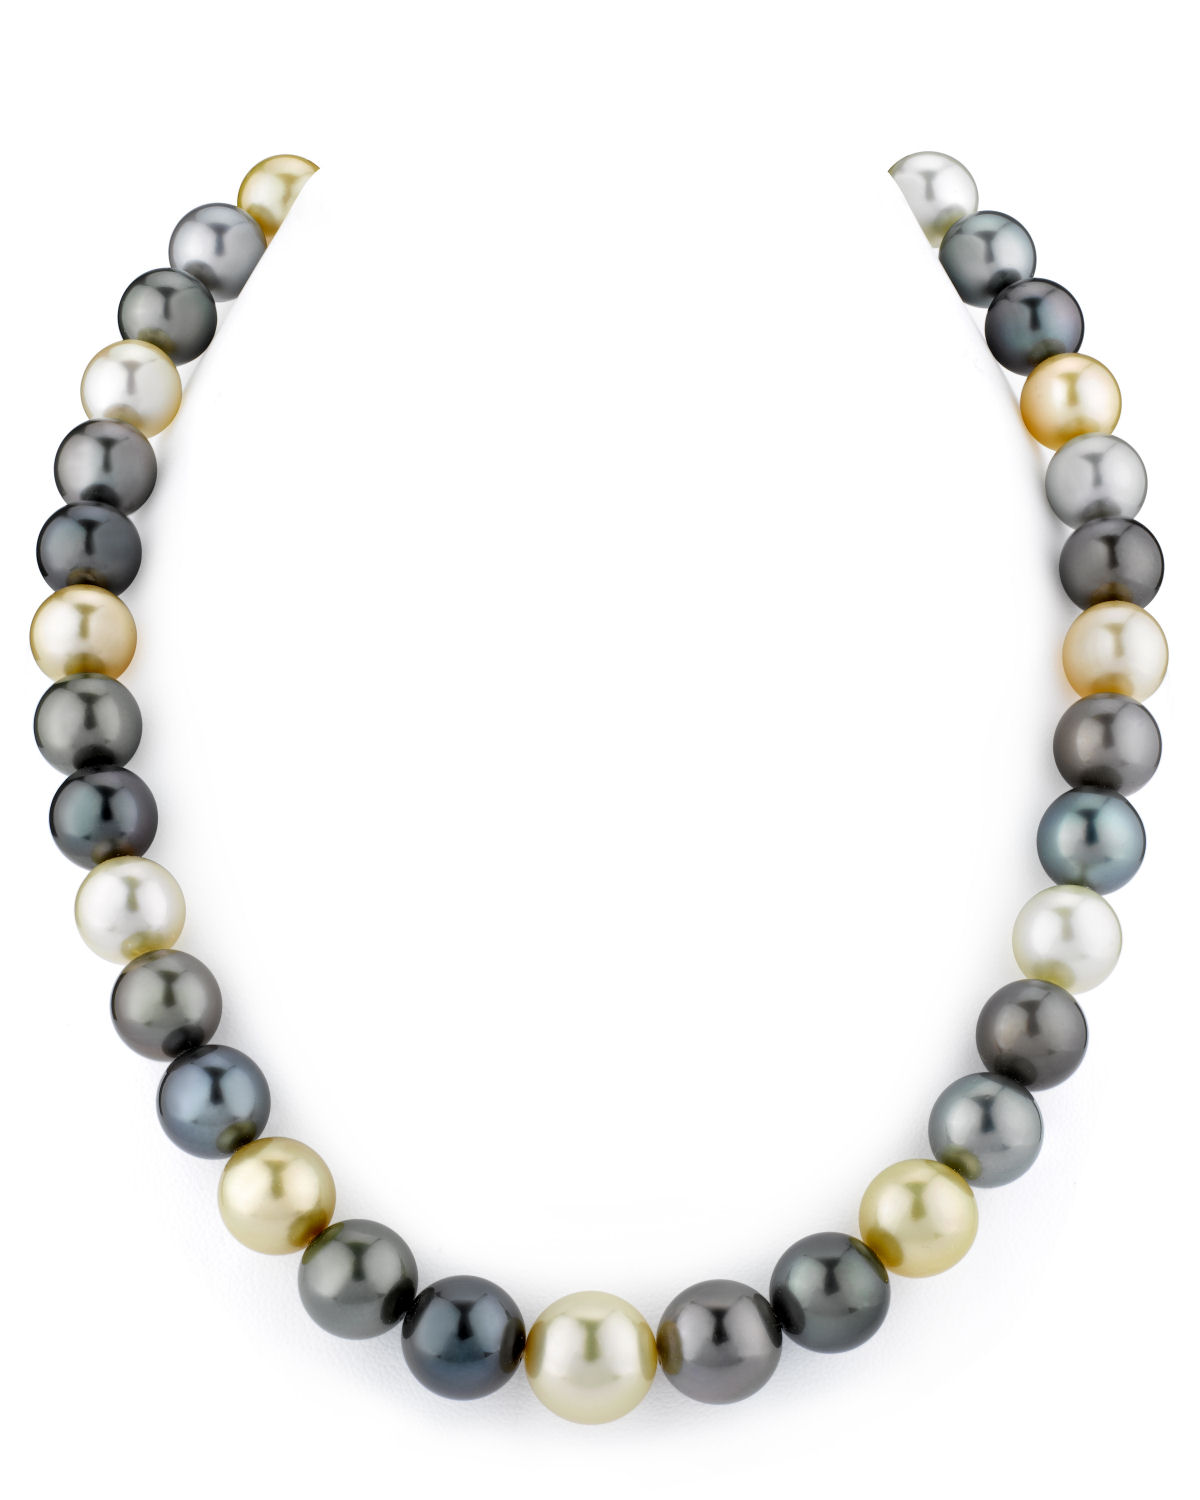 10-12mm South Sea Multicolor Pearl Necklace - AAAA Quality